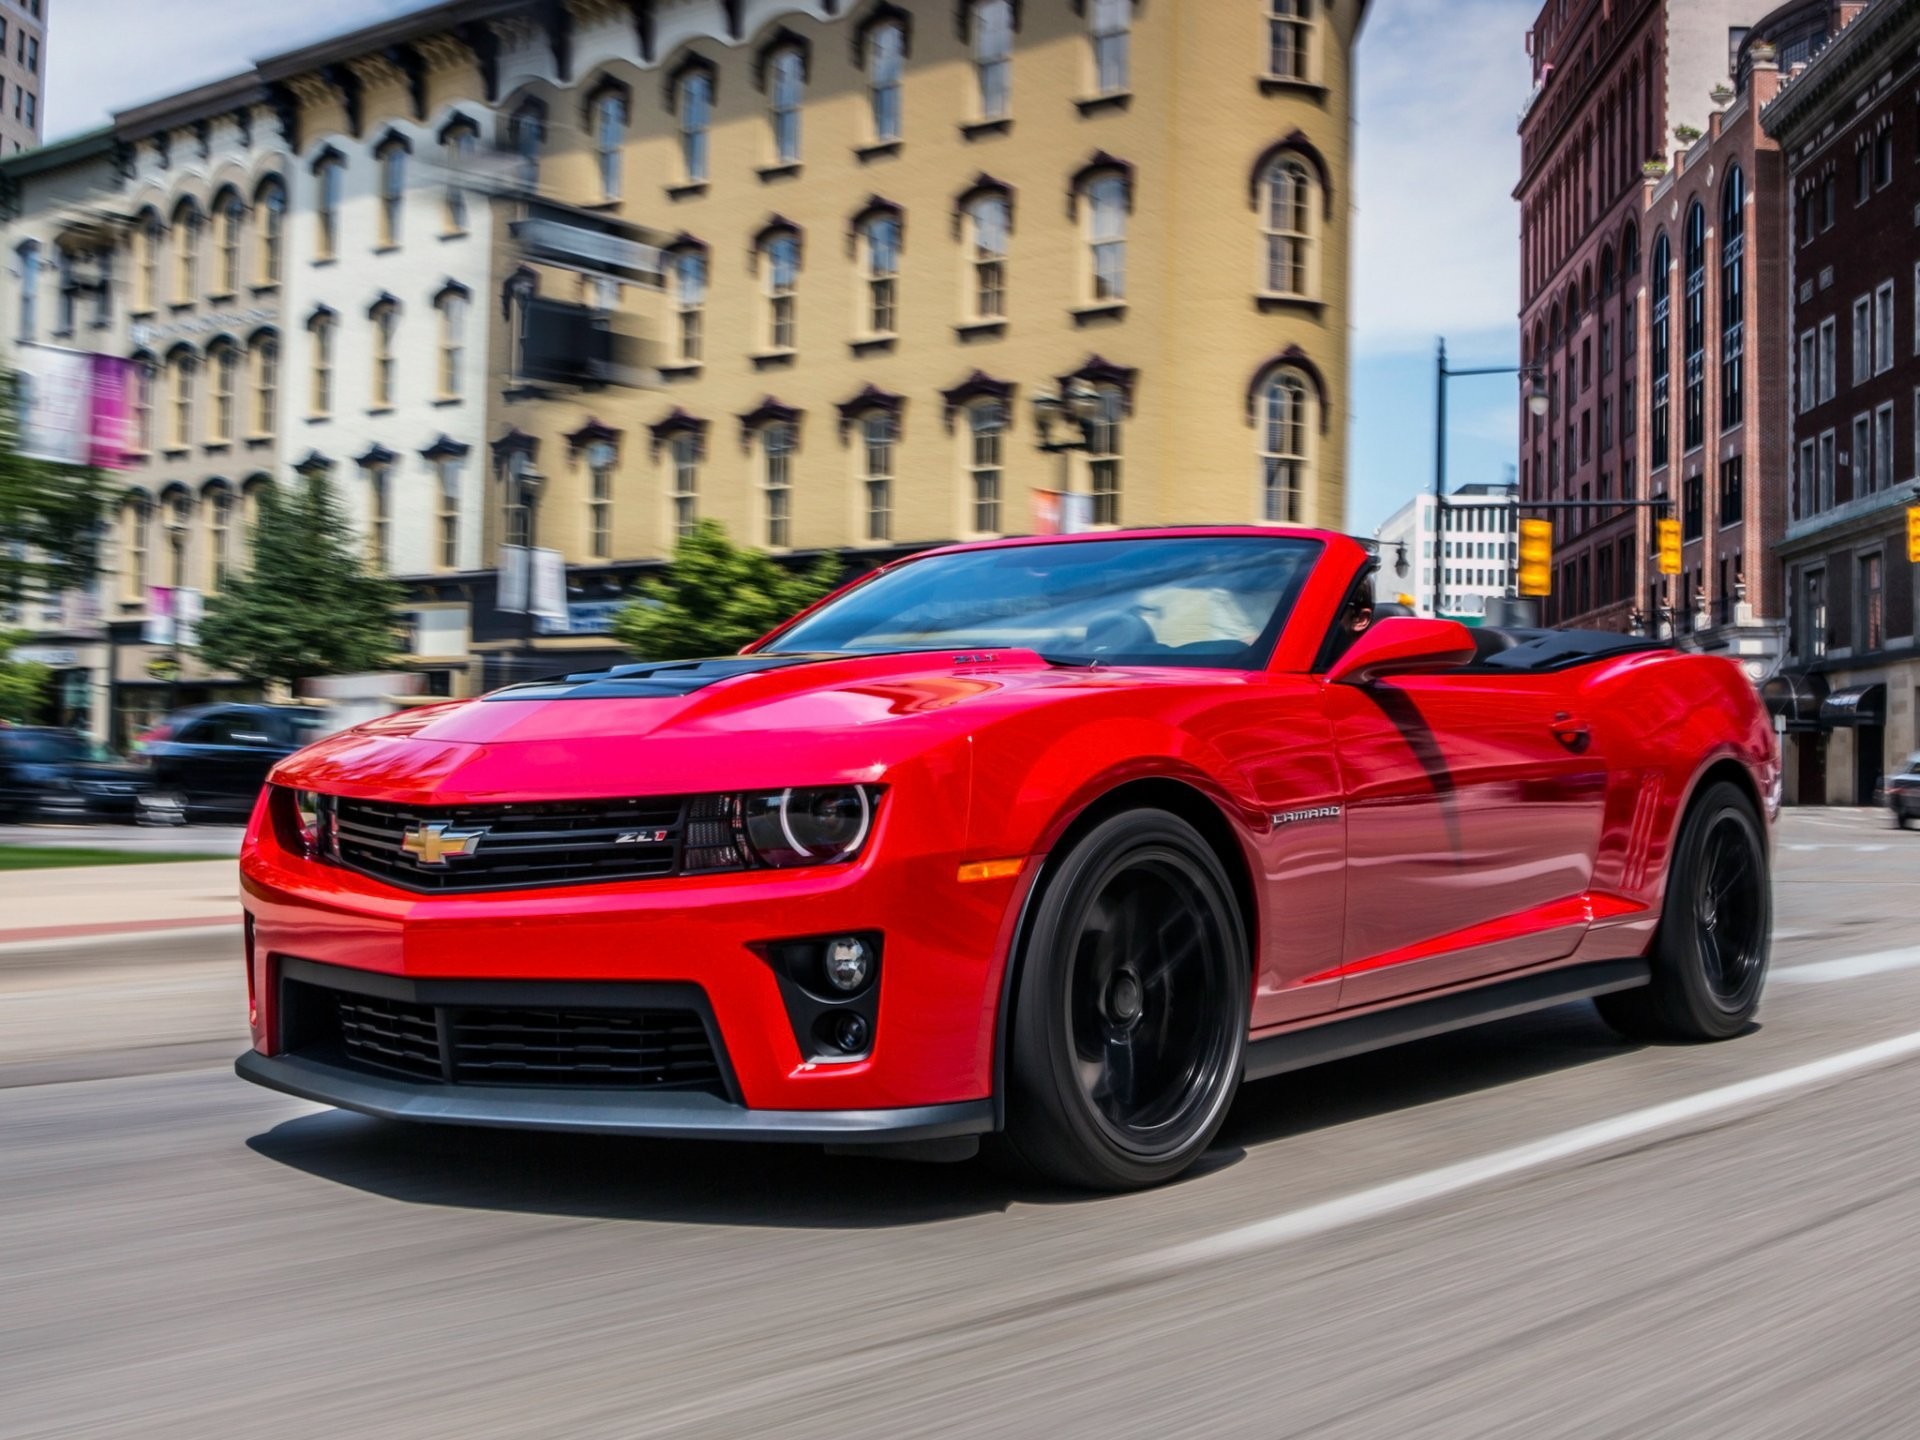 1920x1440 chevrolet camaro zl1 convertible vehicles machine chevrolet camaro  convertible red motion road town buildings cars red